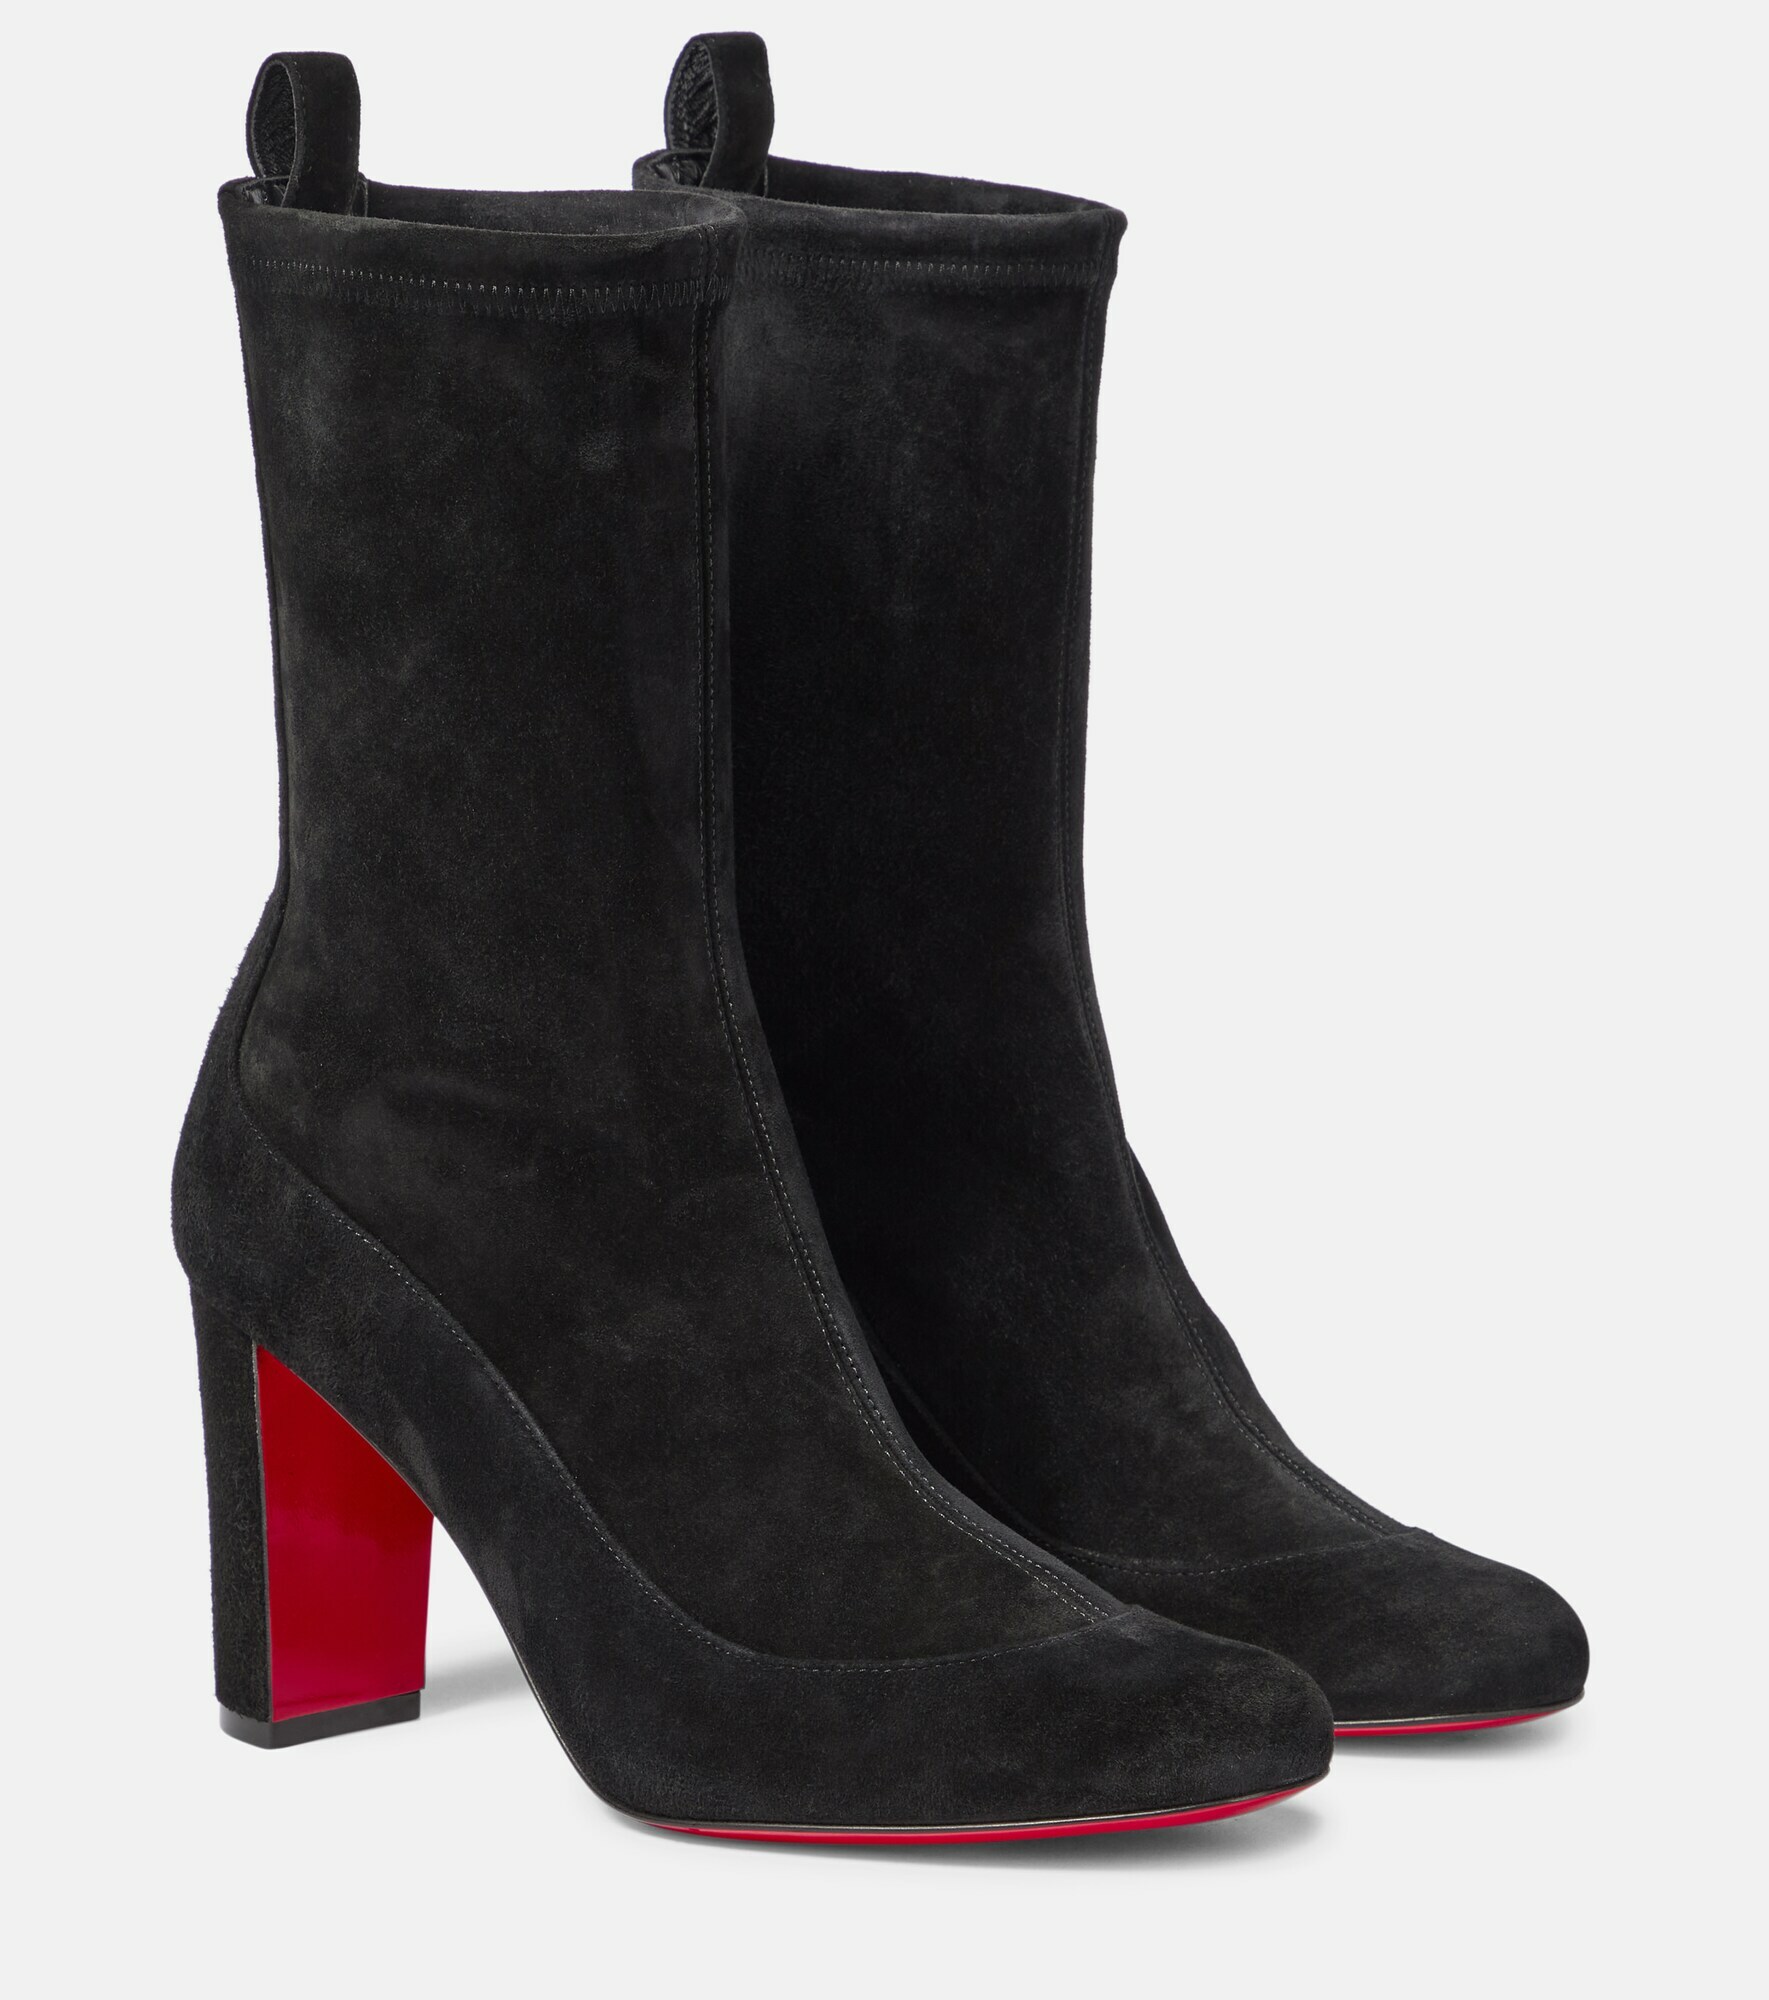 Christian Louboutin - Gena 85 suede ankle boots Christian